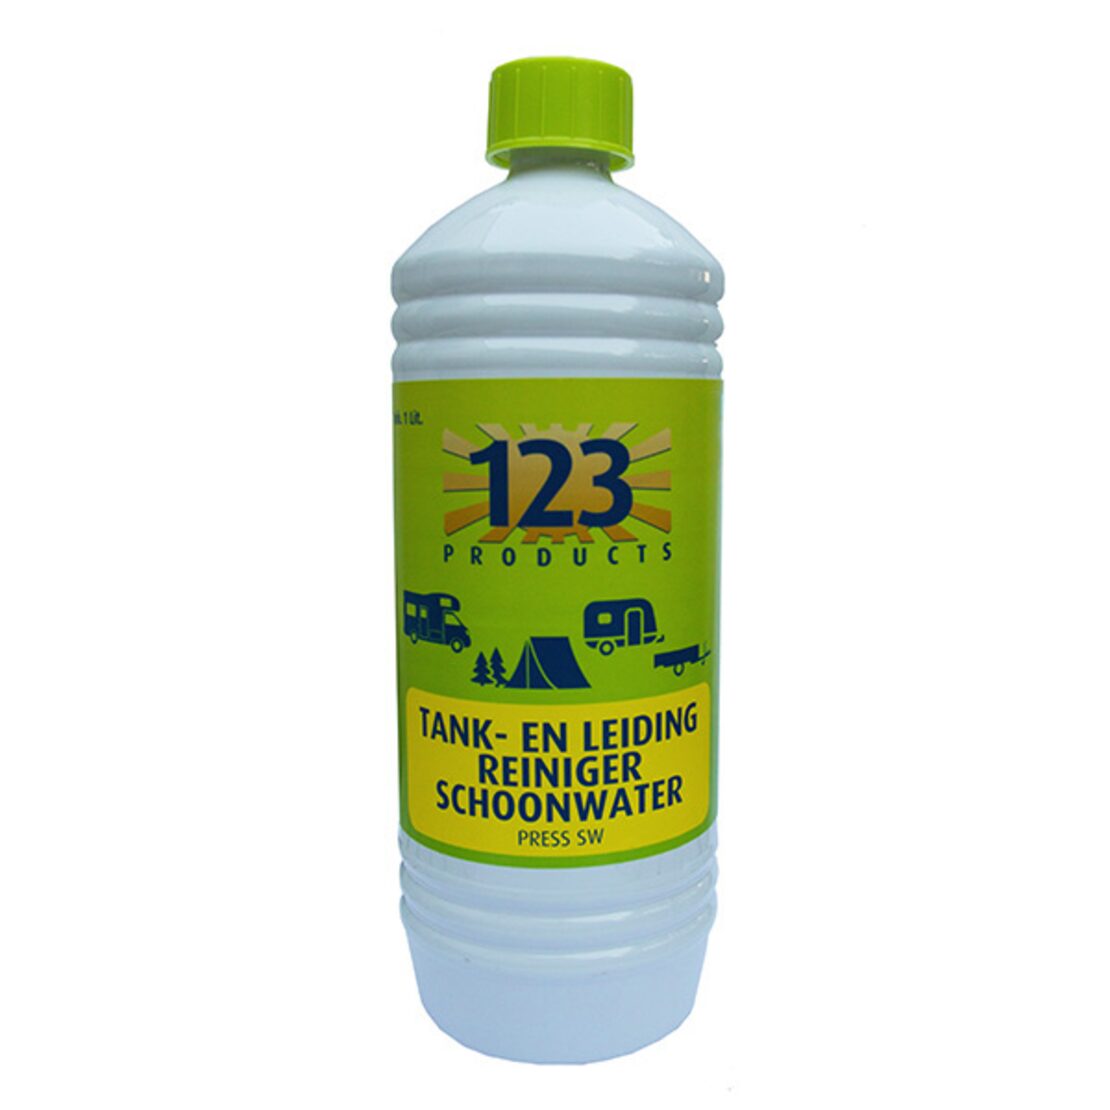 123 PRODUCTS Press Sw 1Ltr